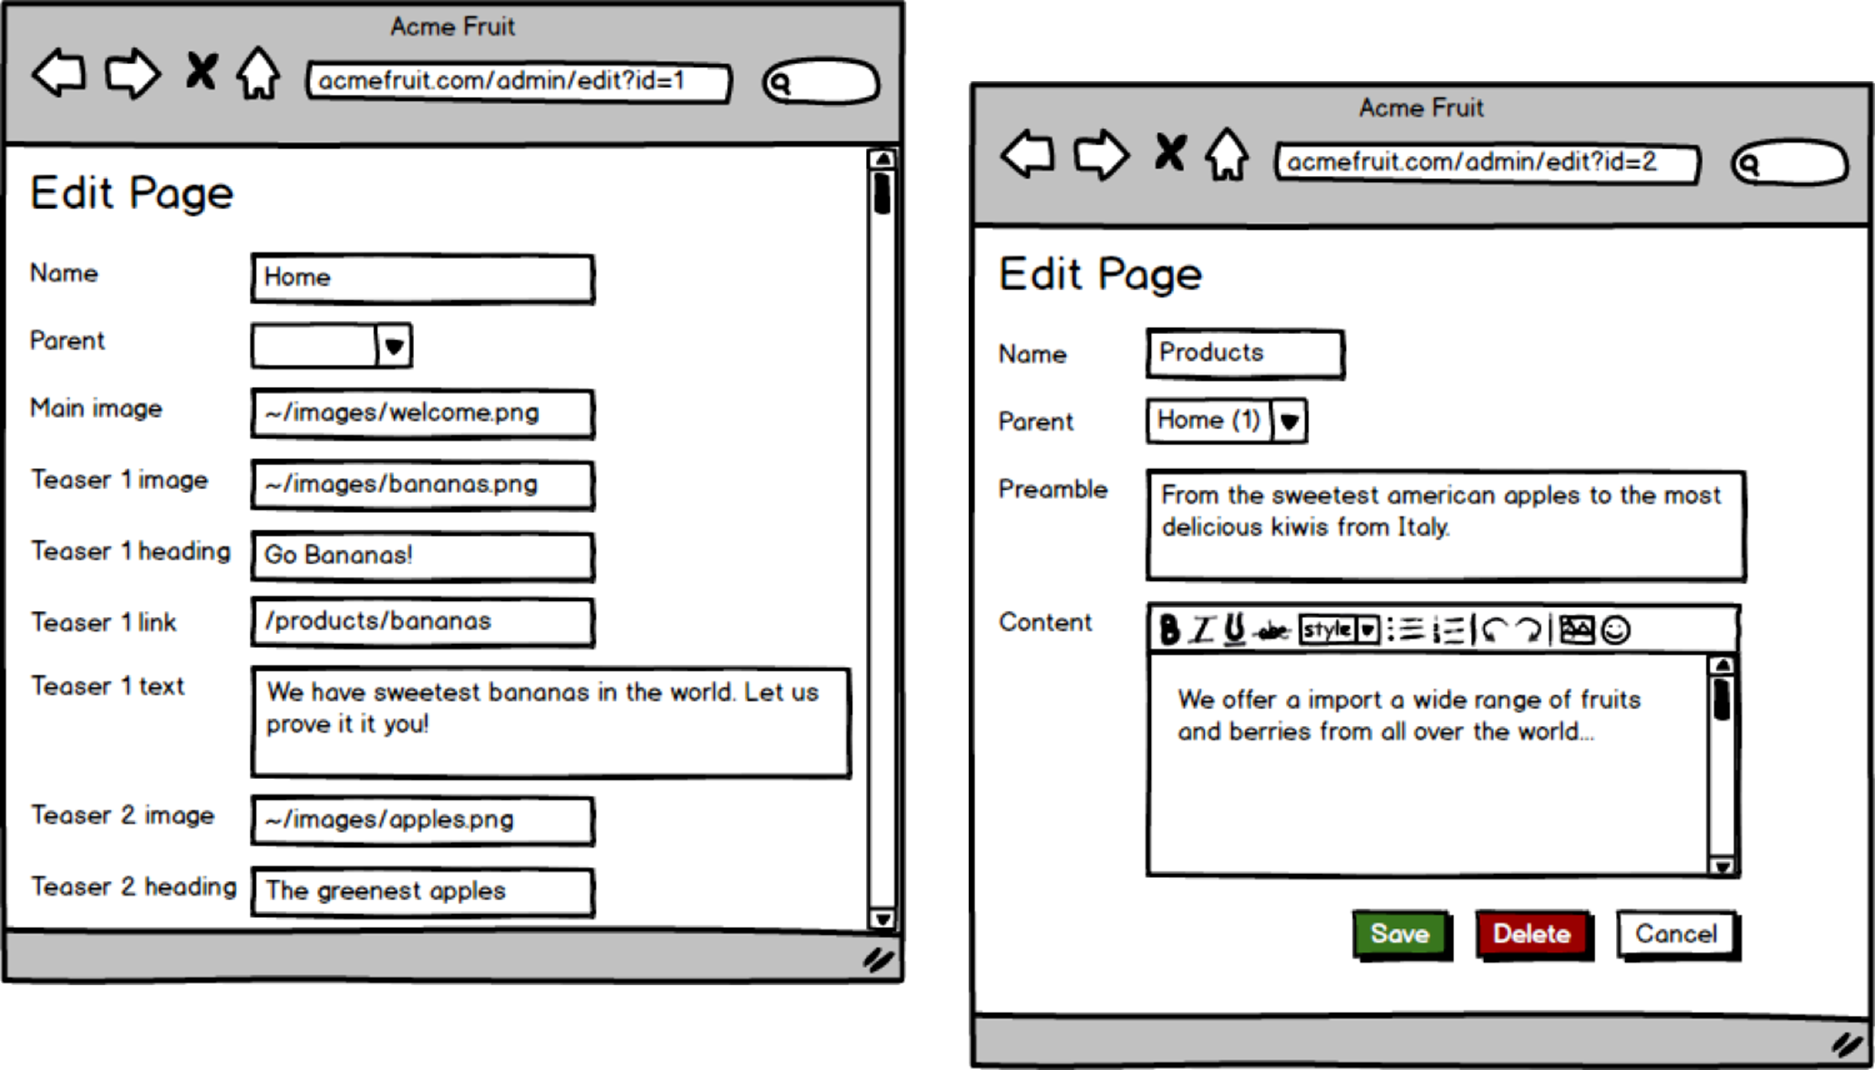 Editing the start page and the Products page after updating the Edit Page dialog.